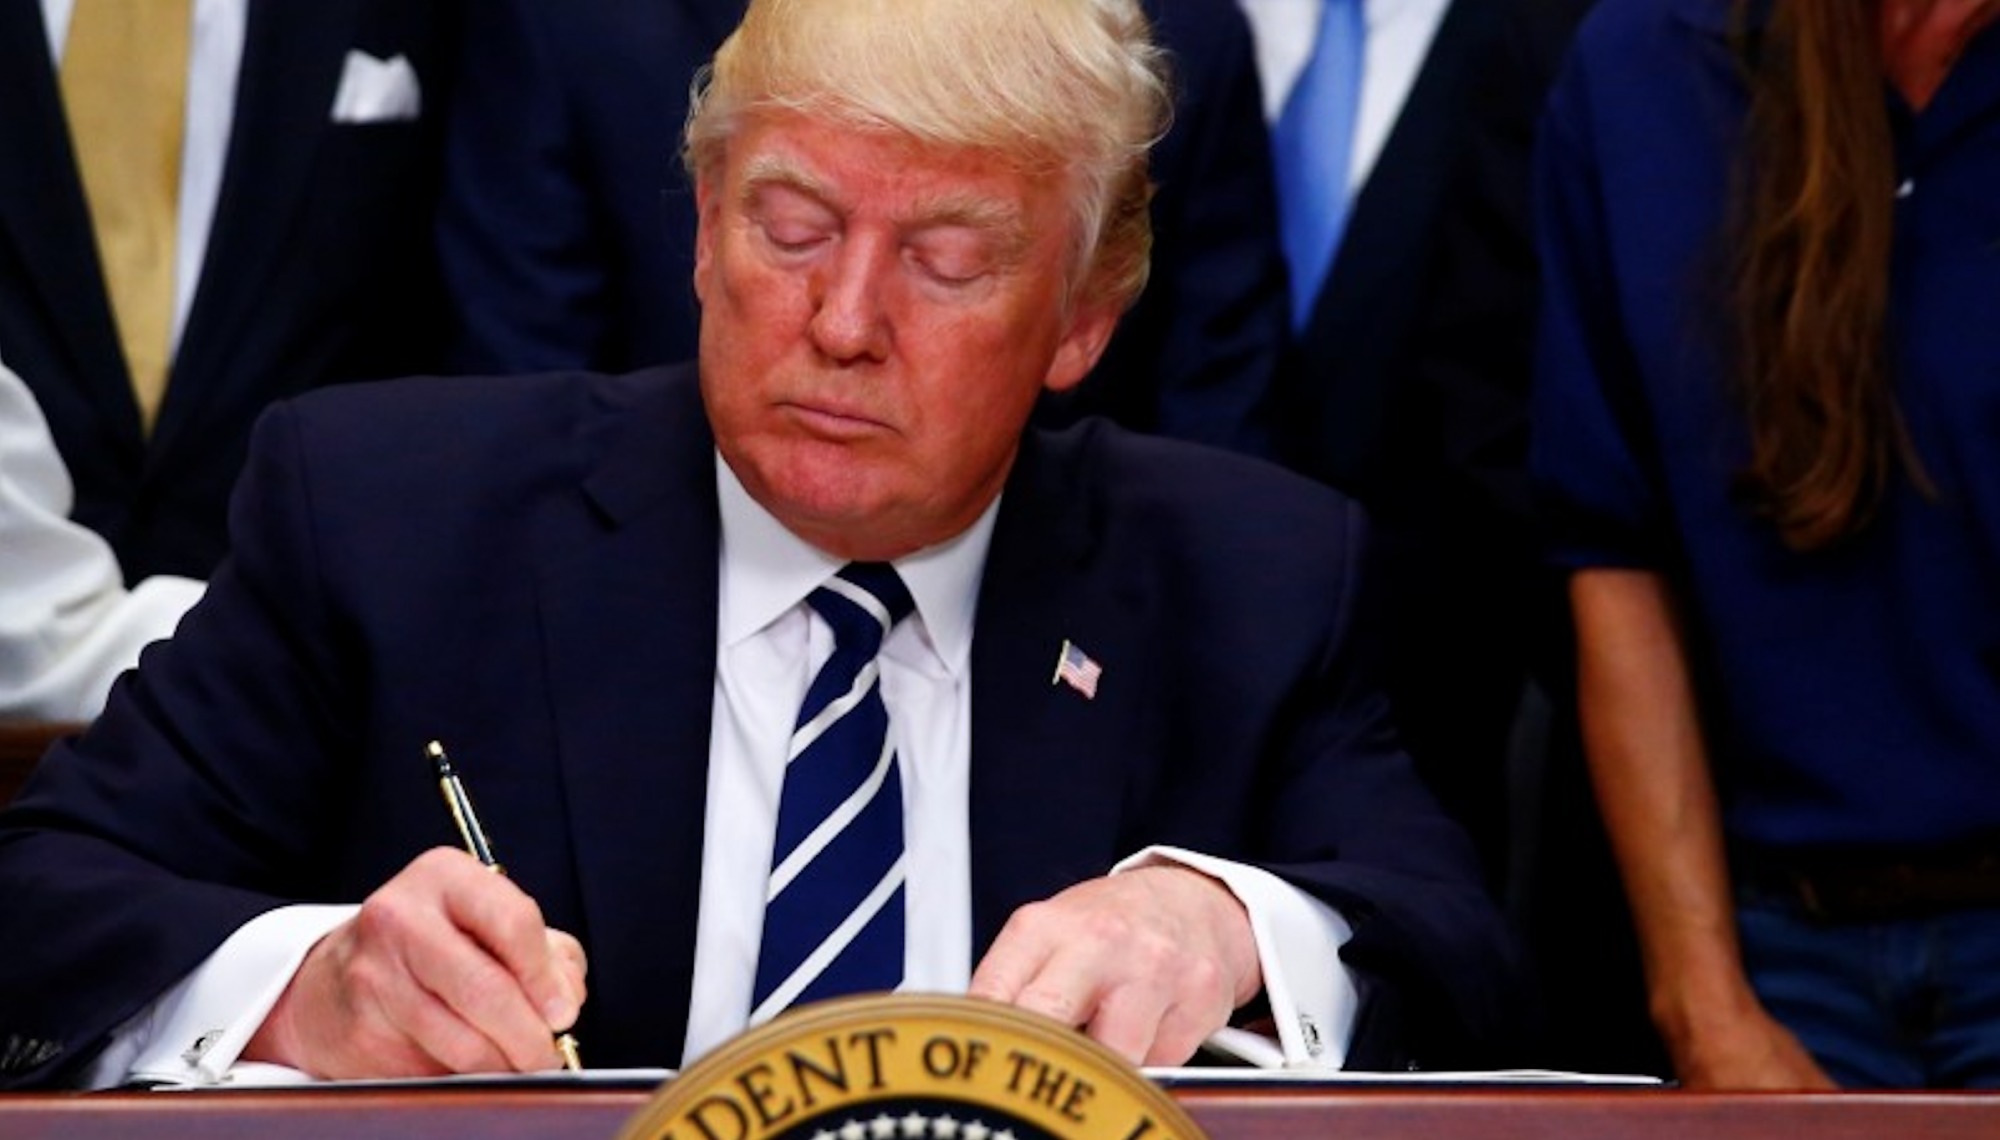 president donald trump signing the american ai initiative executive order on february 11 2019